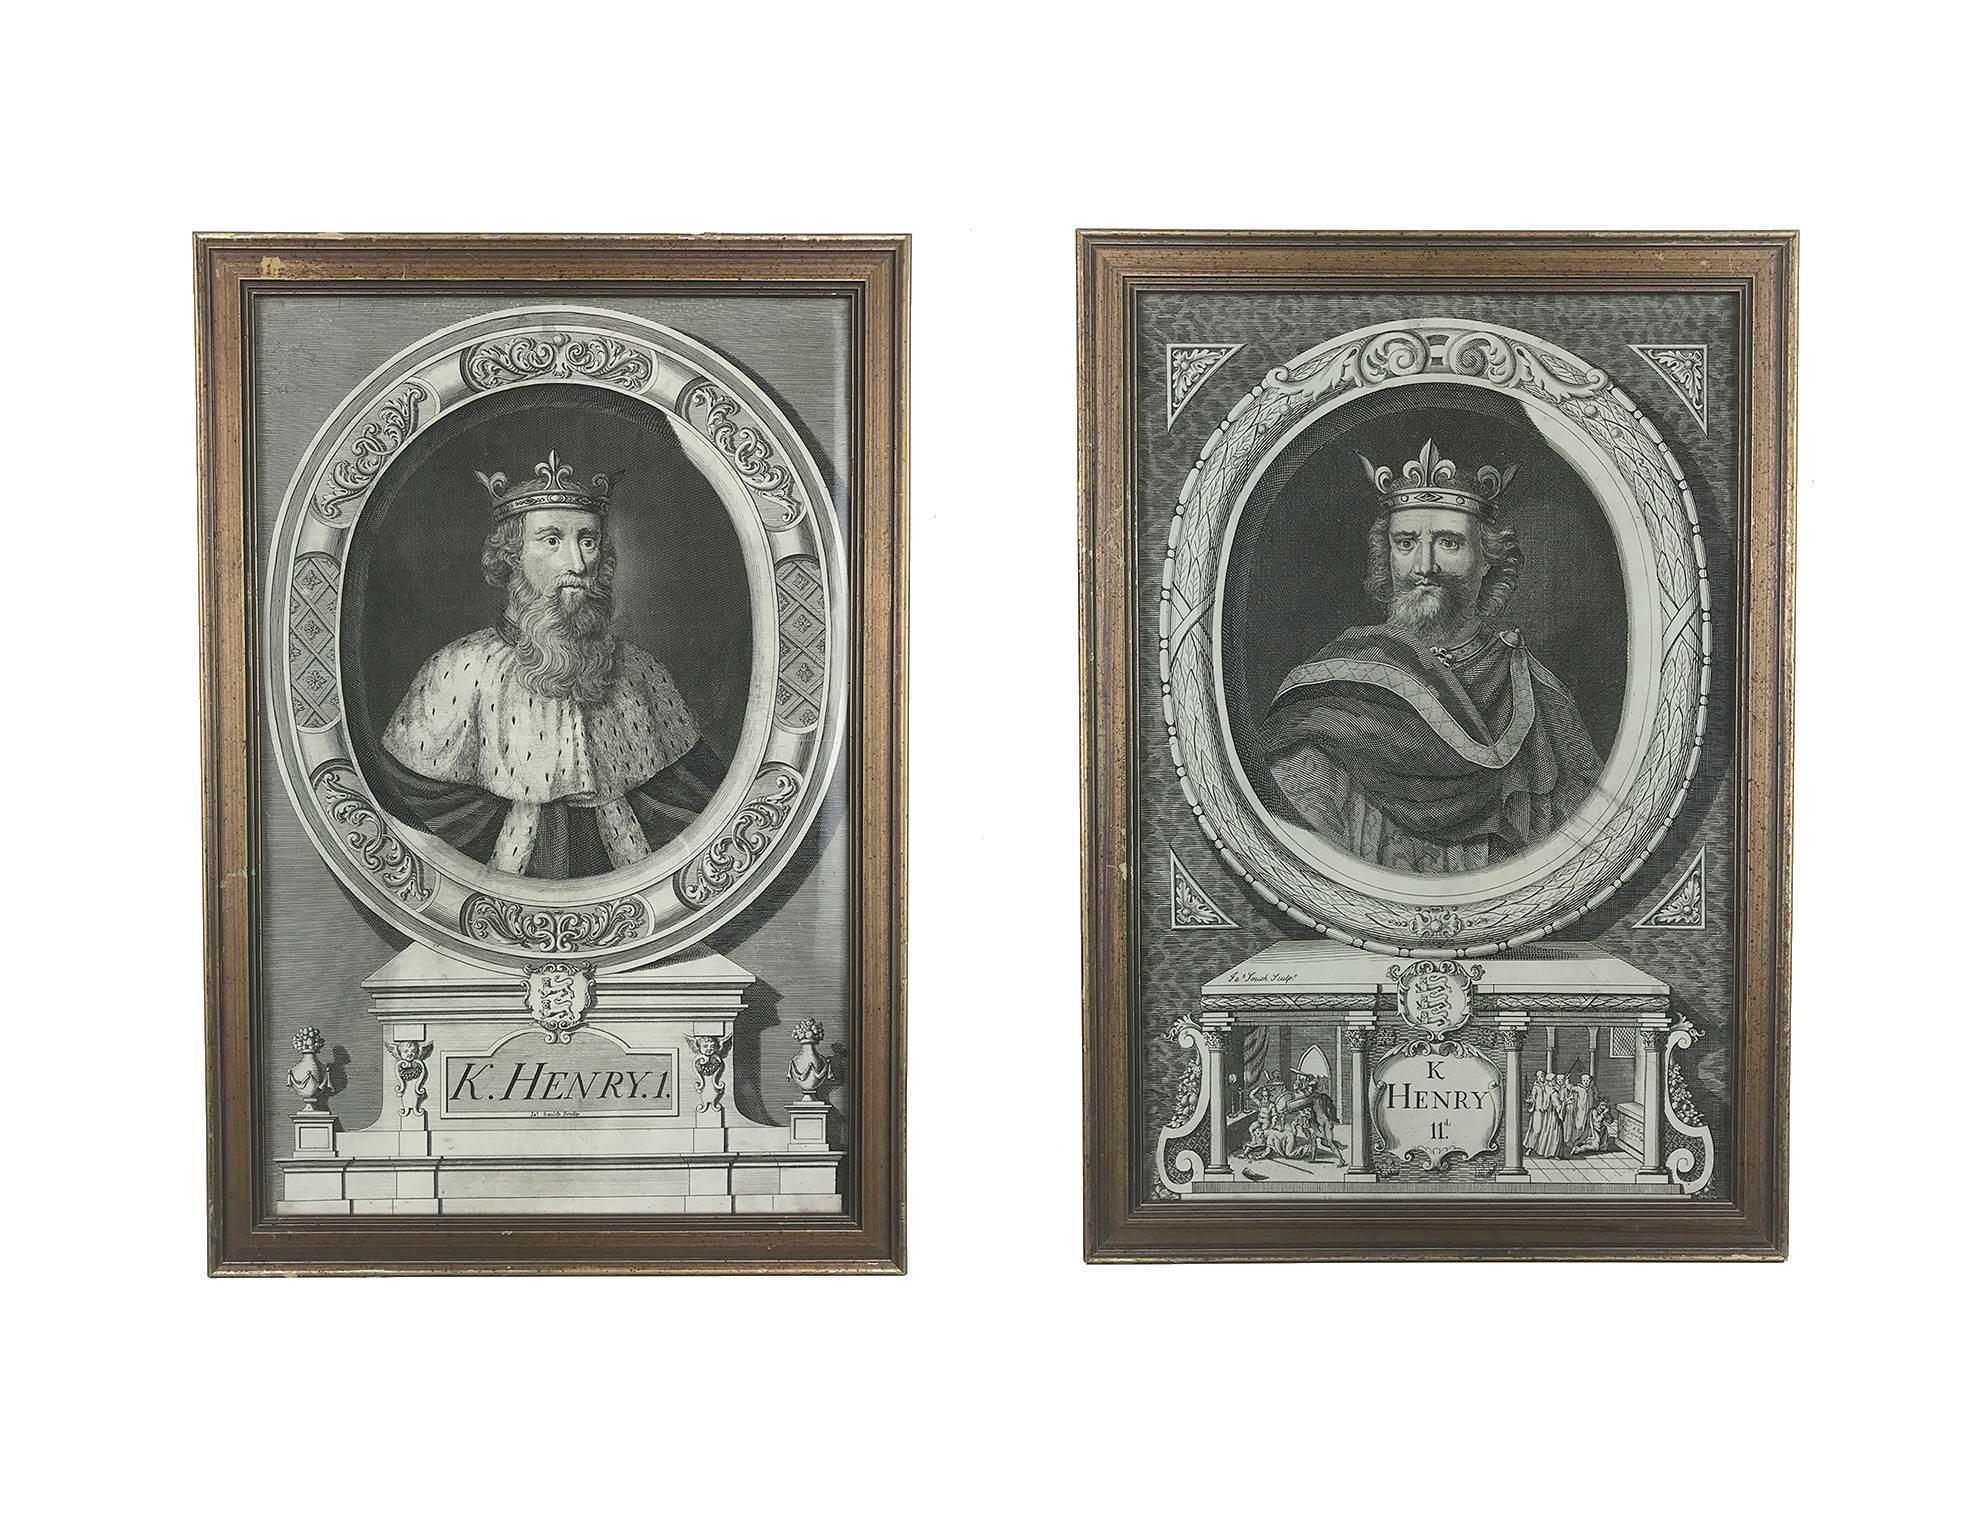 Large set of eleven (11) copperplate engravings depicting The Heads of Illustrious Persons of Great Britain. Engraved by Jacobus Houbracken and George Vertue and printed in London by John and Paul Knapton. 

Prints dry mounted to board. Frames